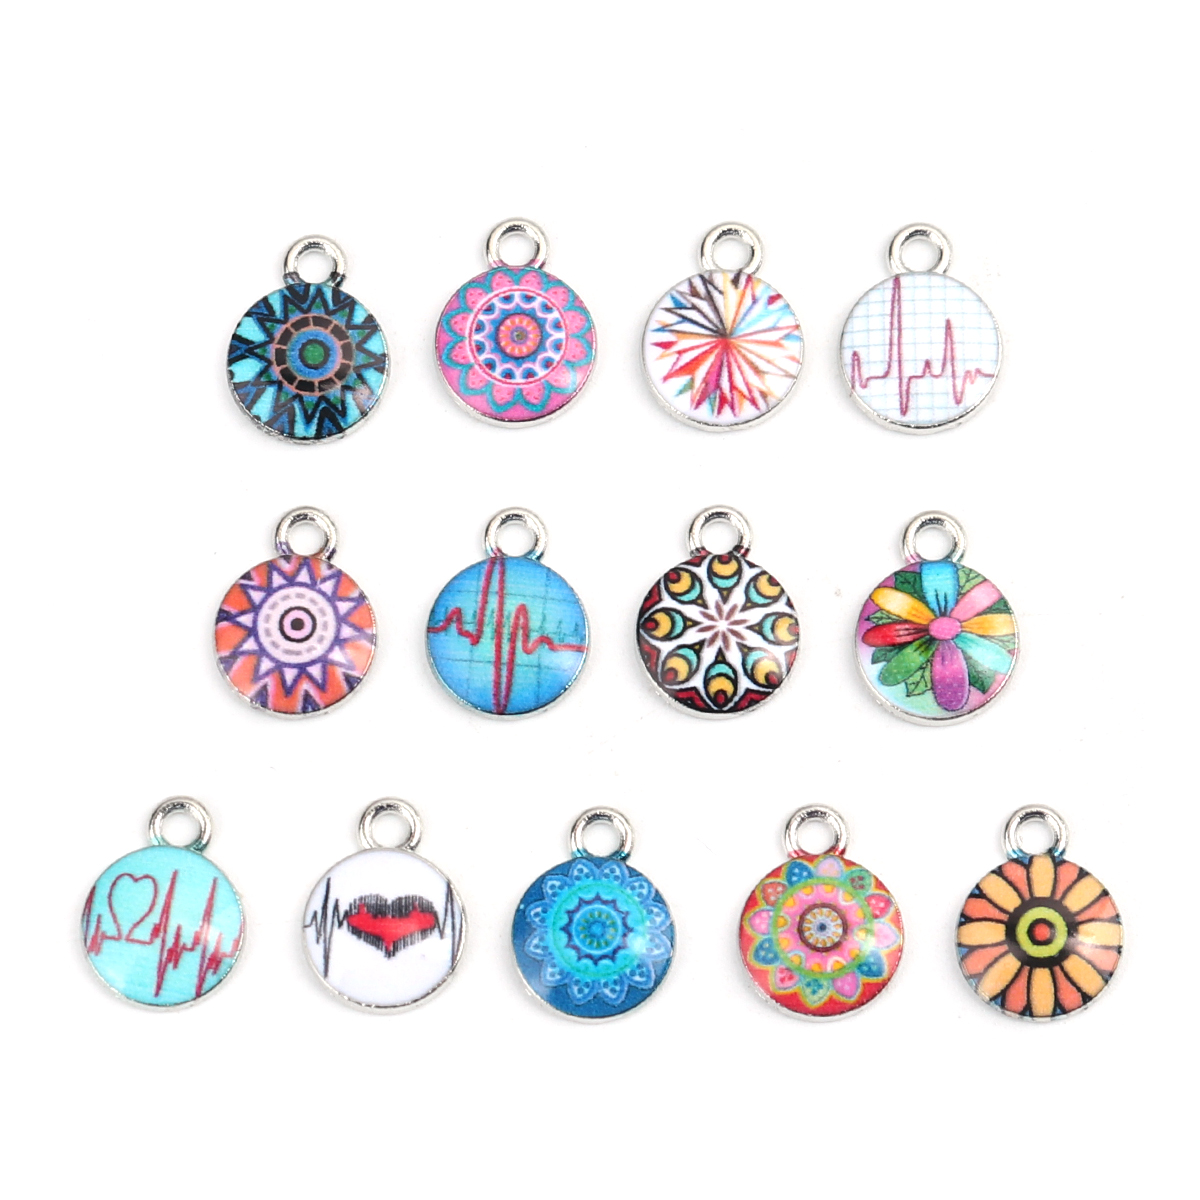 Picture of Zinc Based Alloy & Glass Charms Round Silver Tone Multicolor Heart 14mm x 10mm, 10 PCs